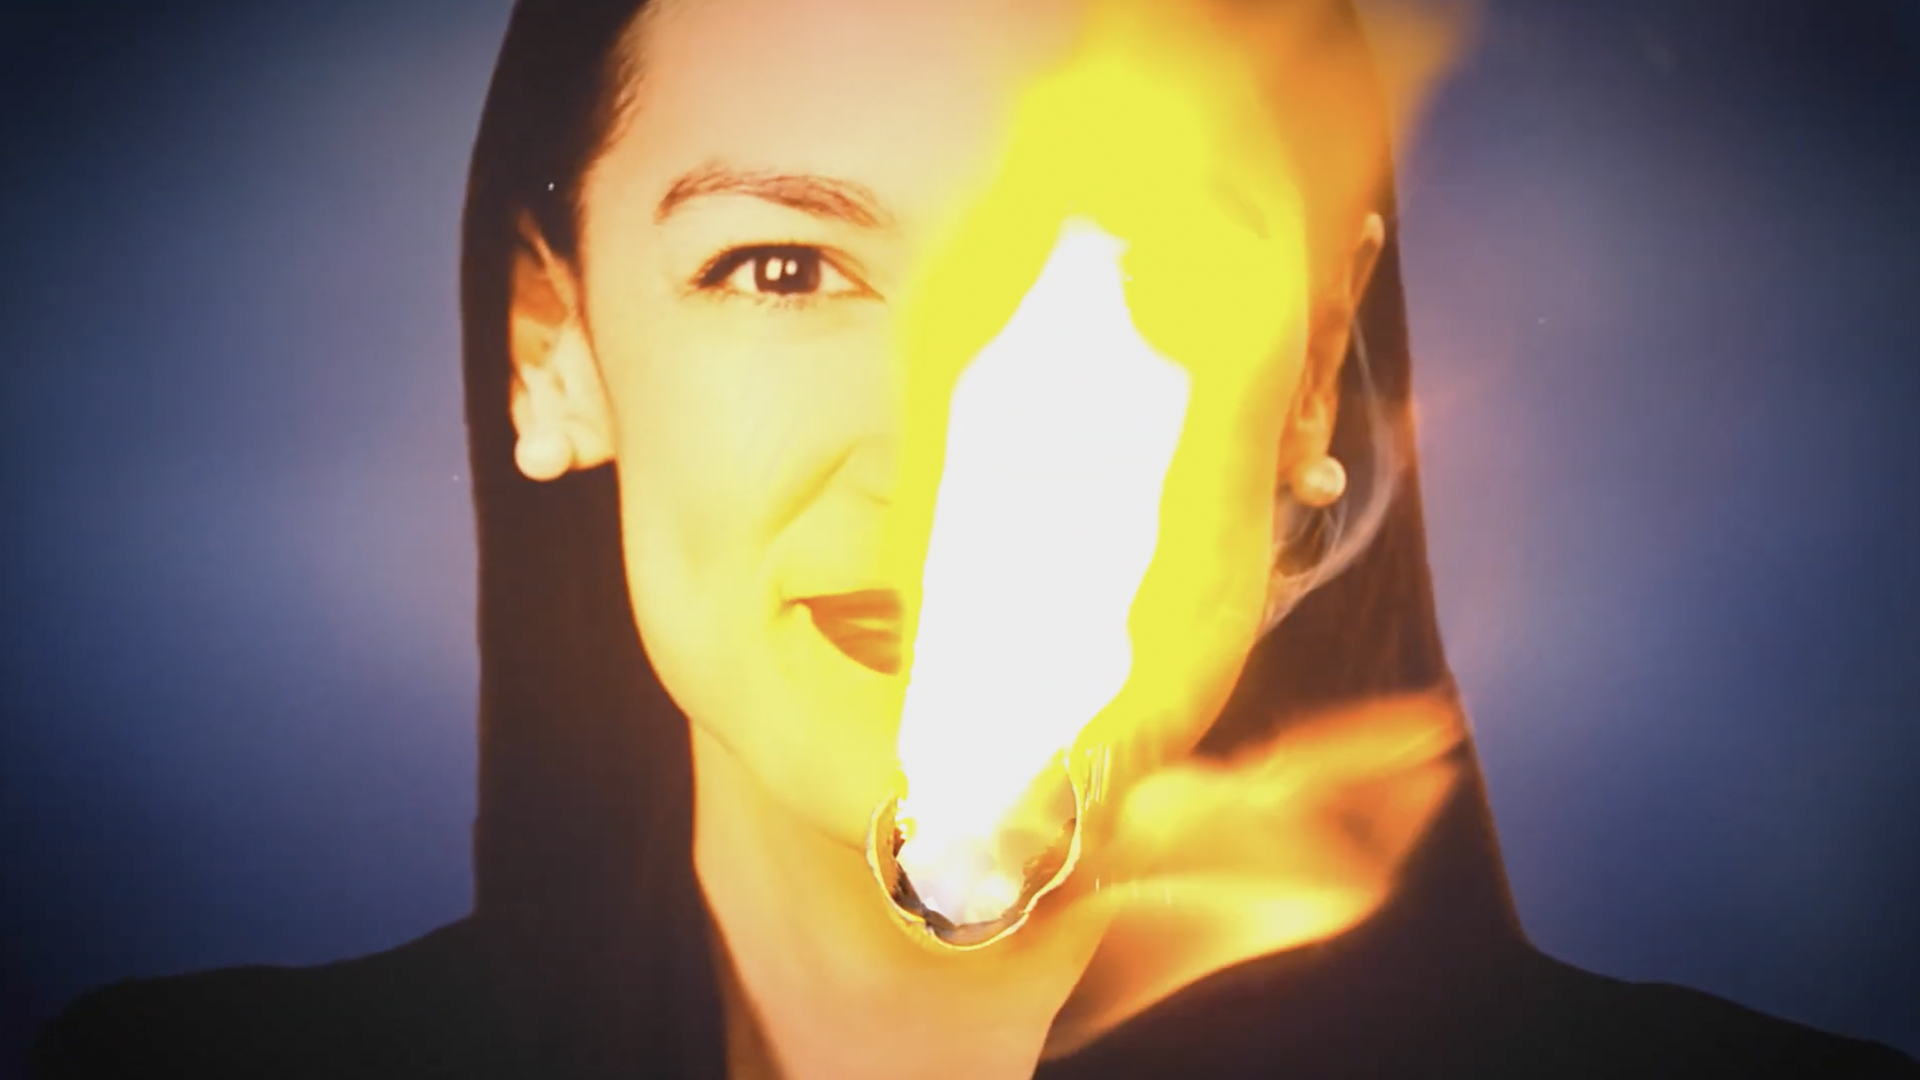 A screenshot from a Republican political ad showing a photo of Rep. Alexandria Ocasio-Cortez in flames.